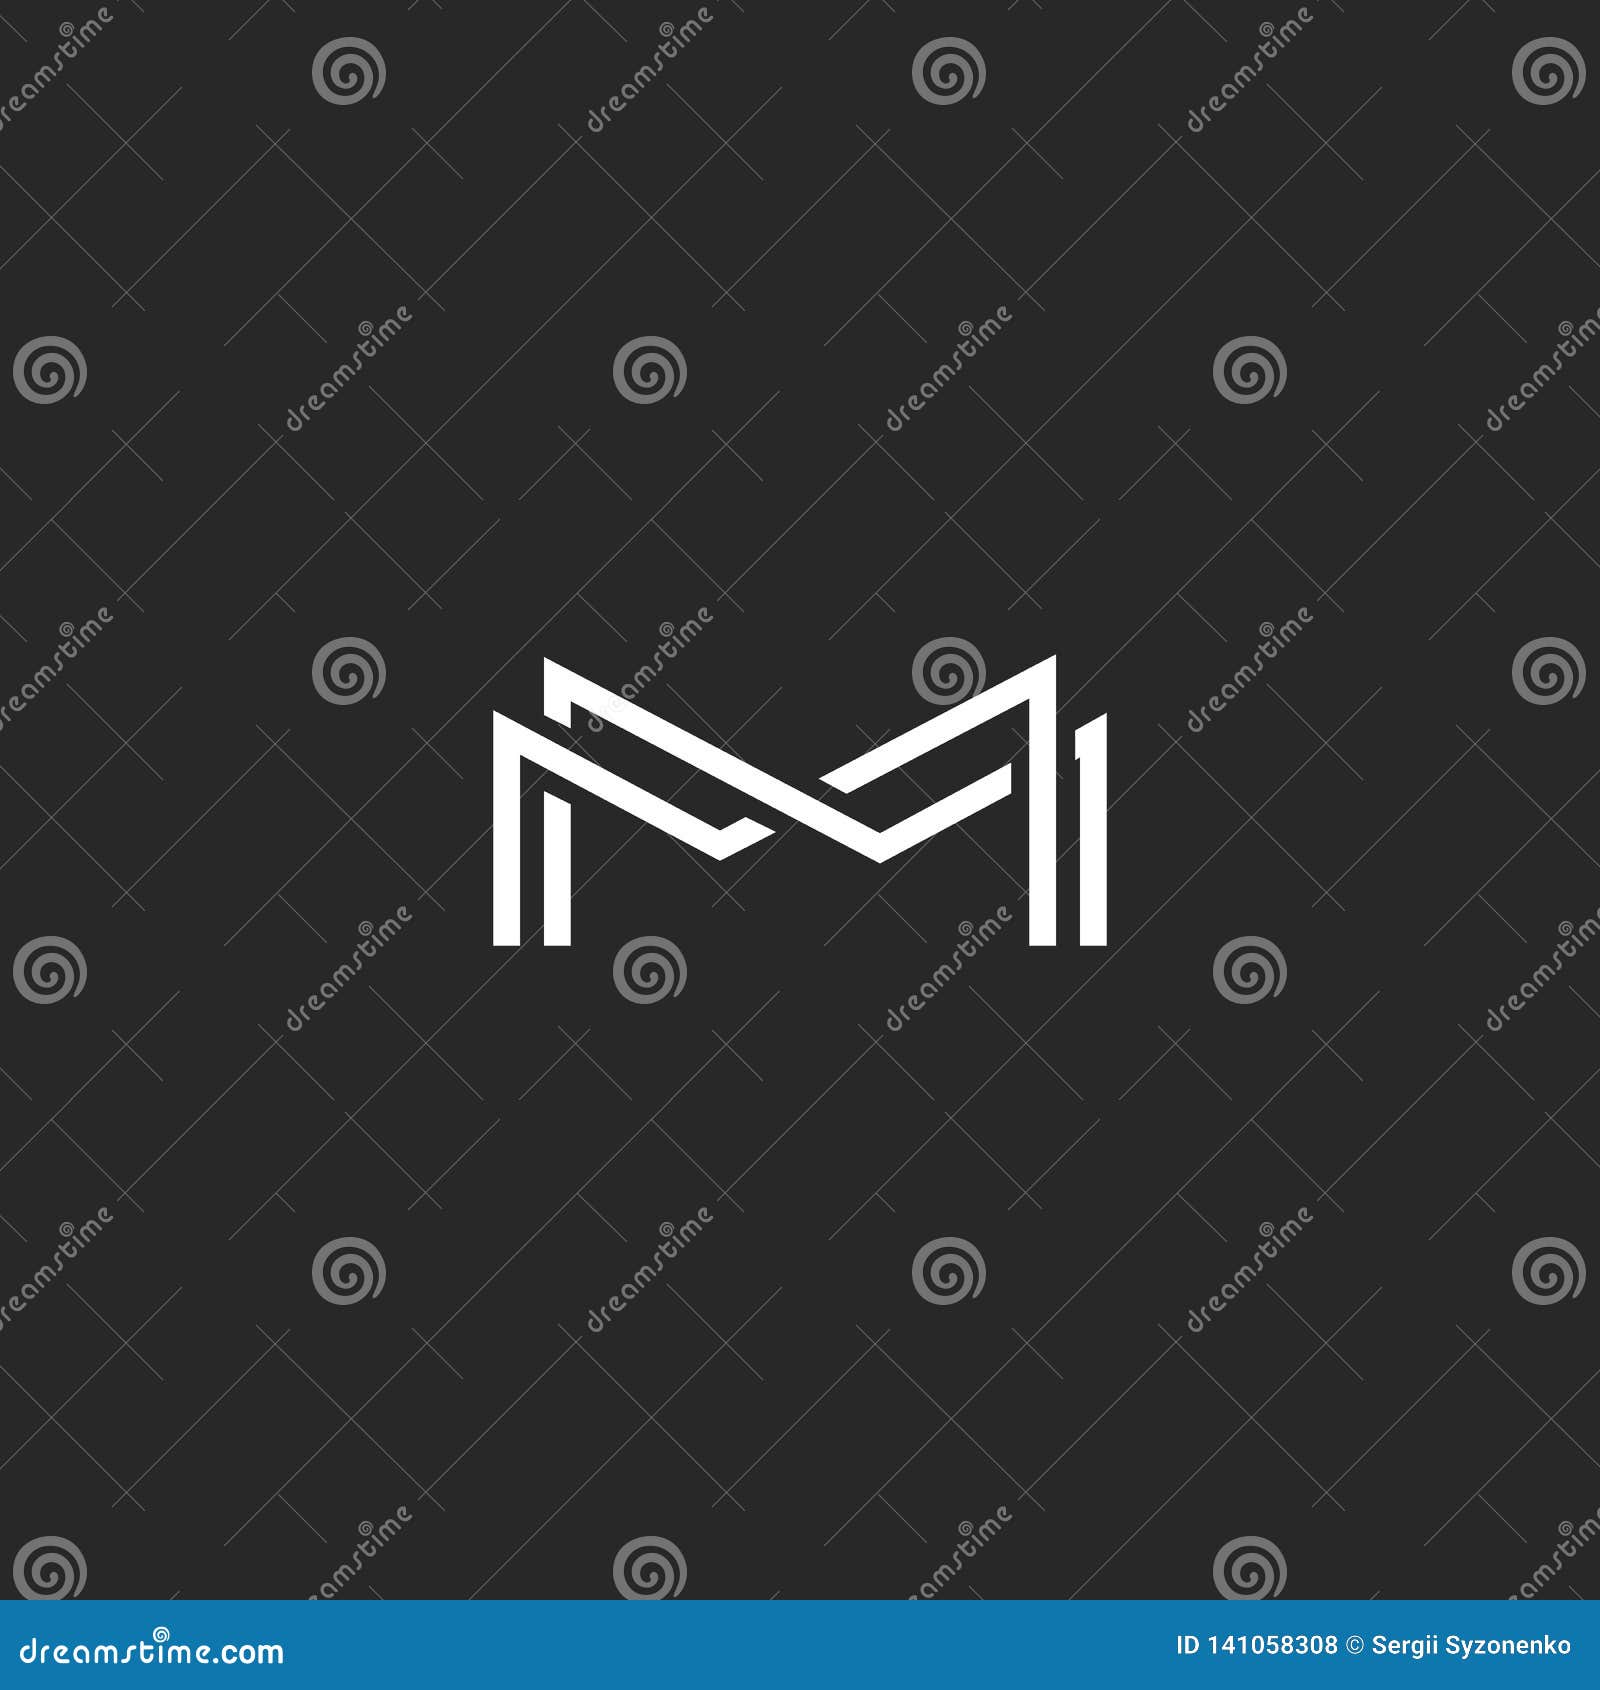 letter m monogram logo, overlapping thin line black and white  s, template wedding invitation emblem or business card